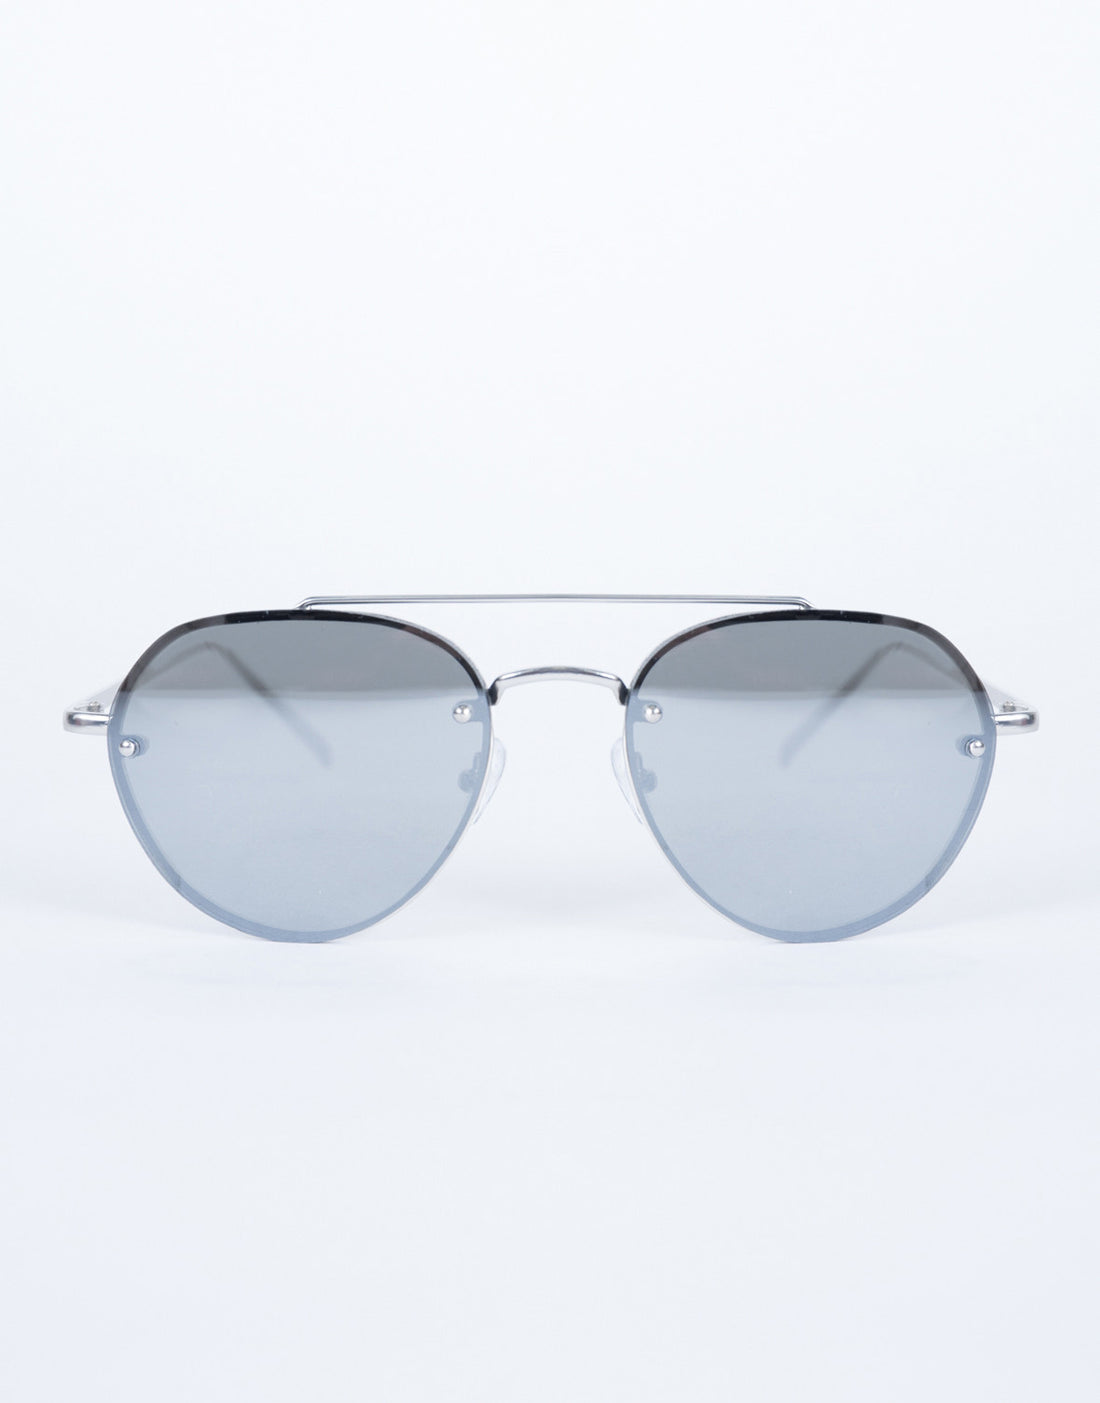 Silver Minimal Aviator Sunnies - Front View